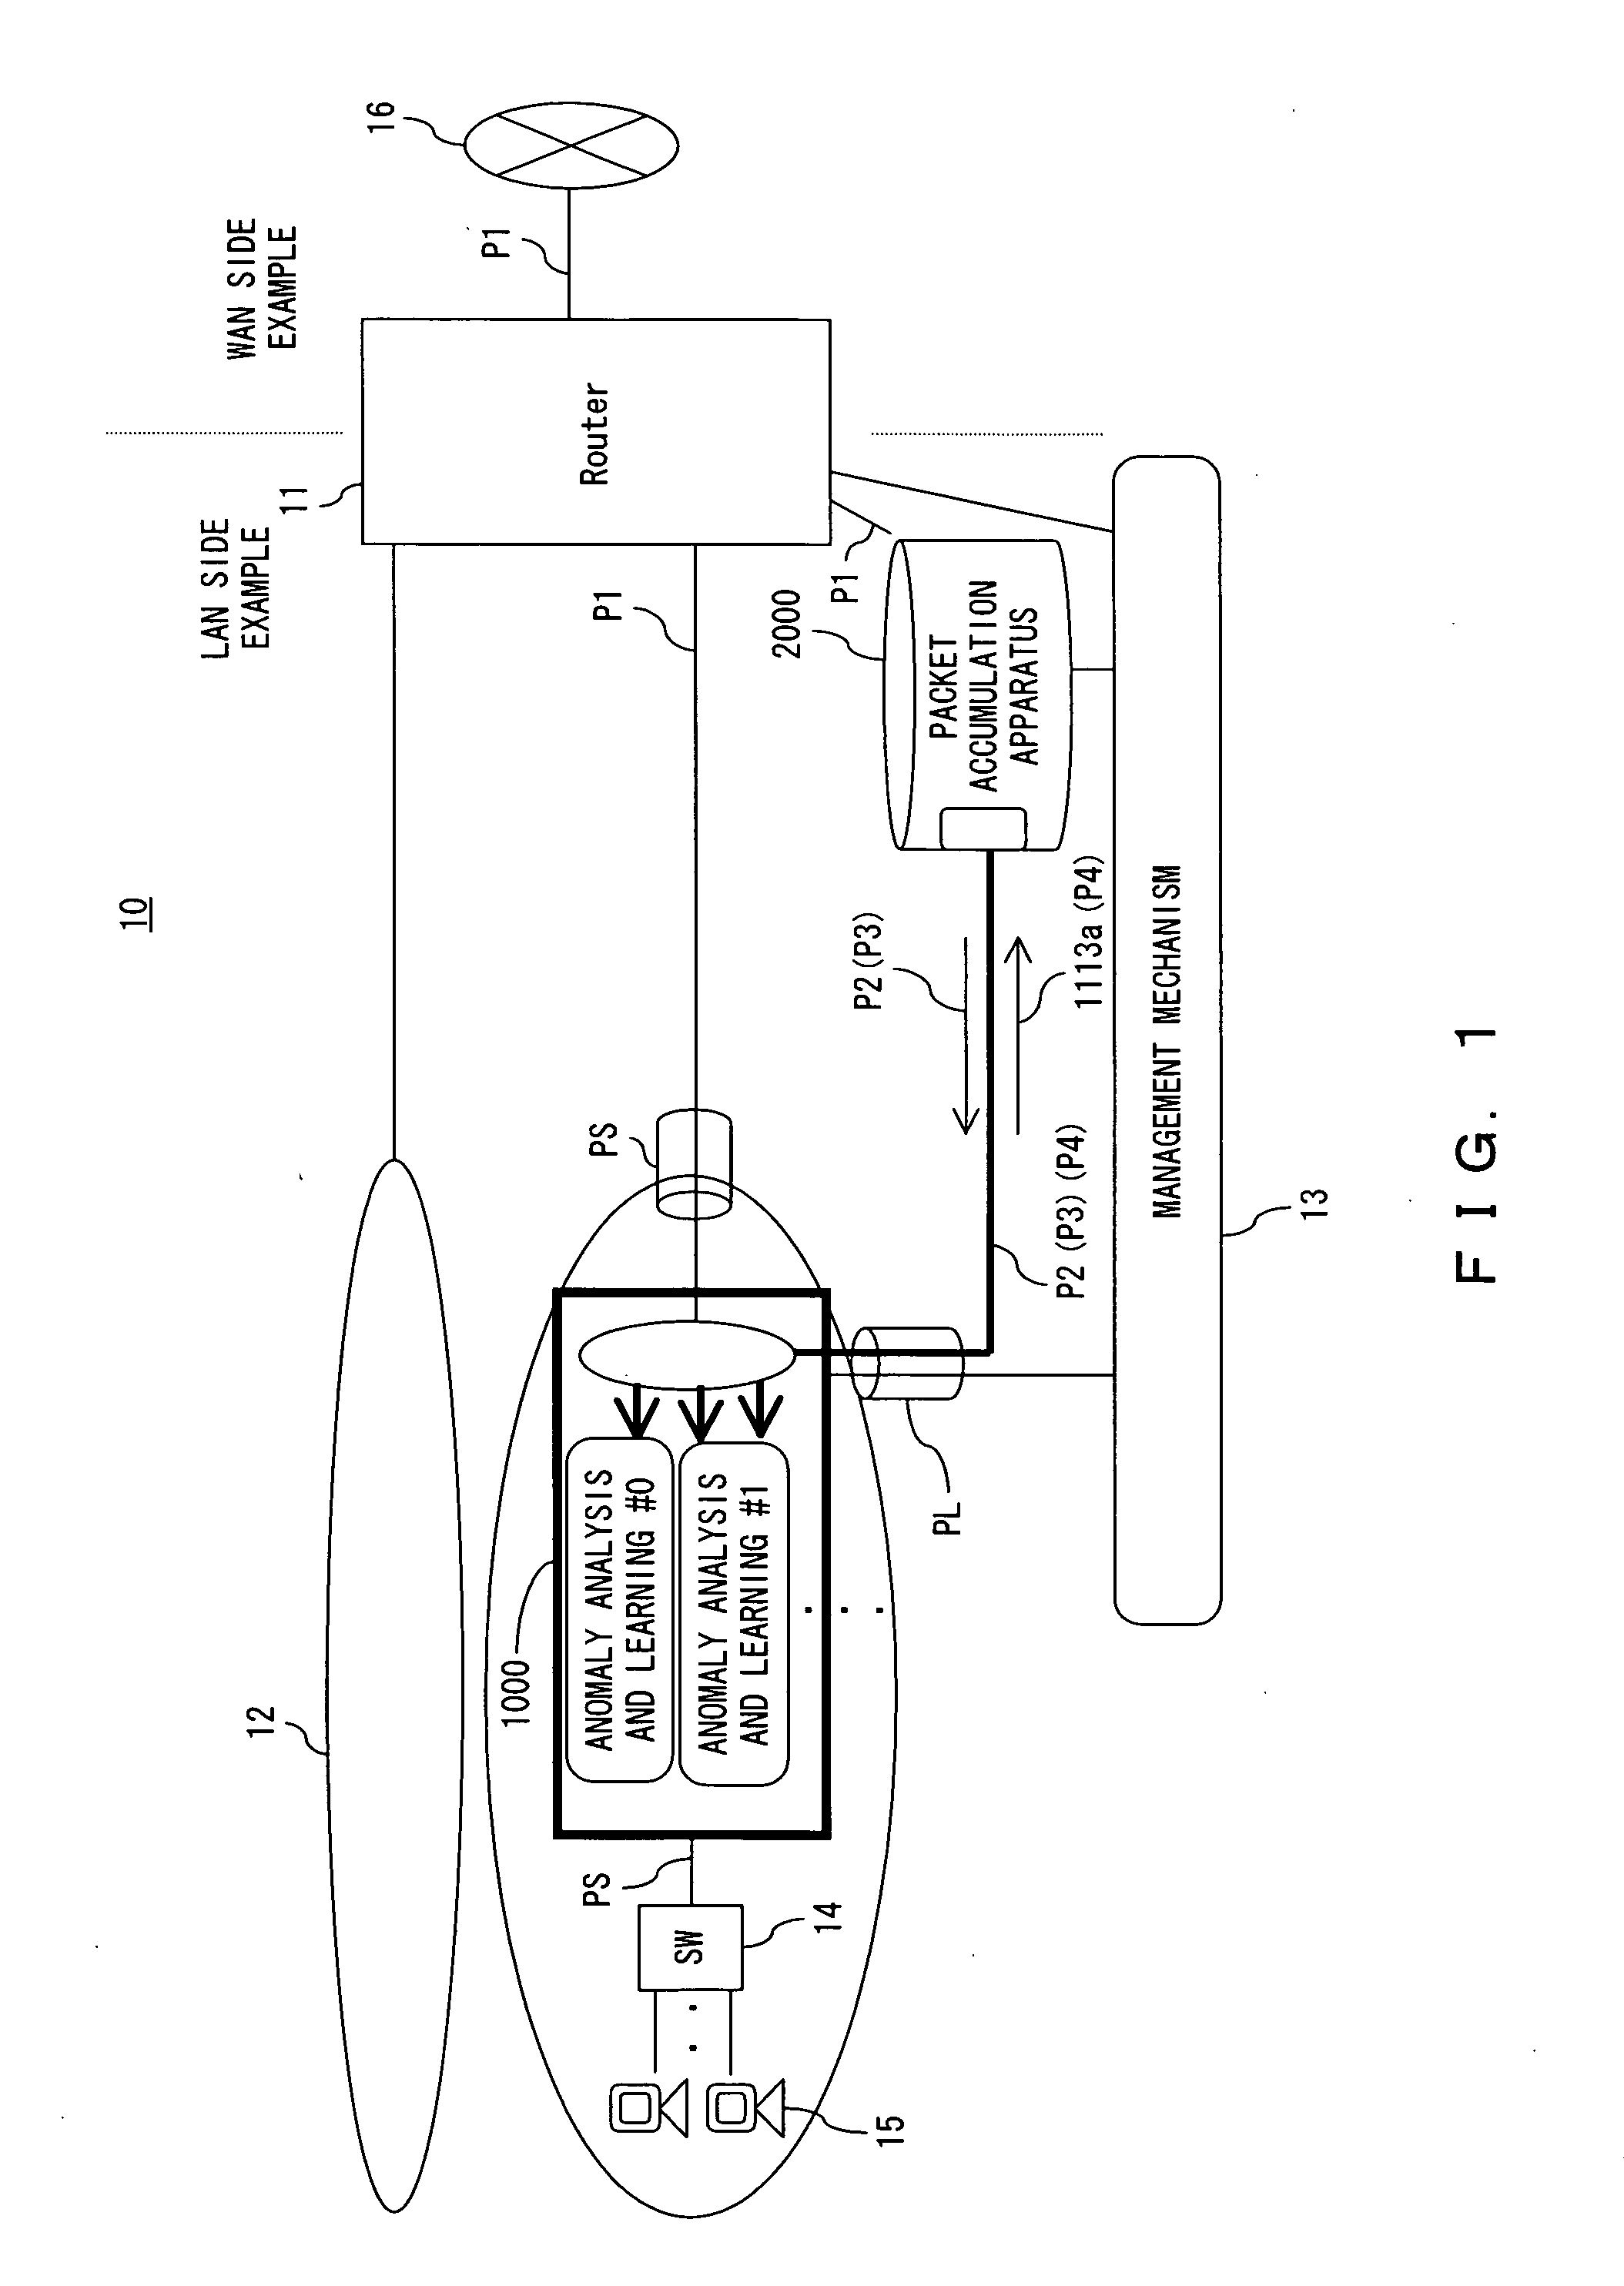 Network security apparatus, network security control method and network security system